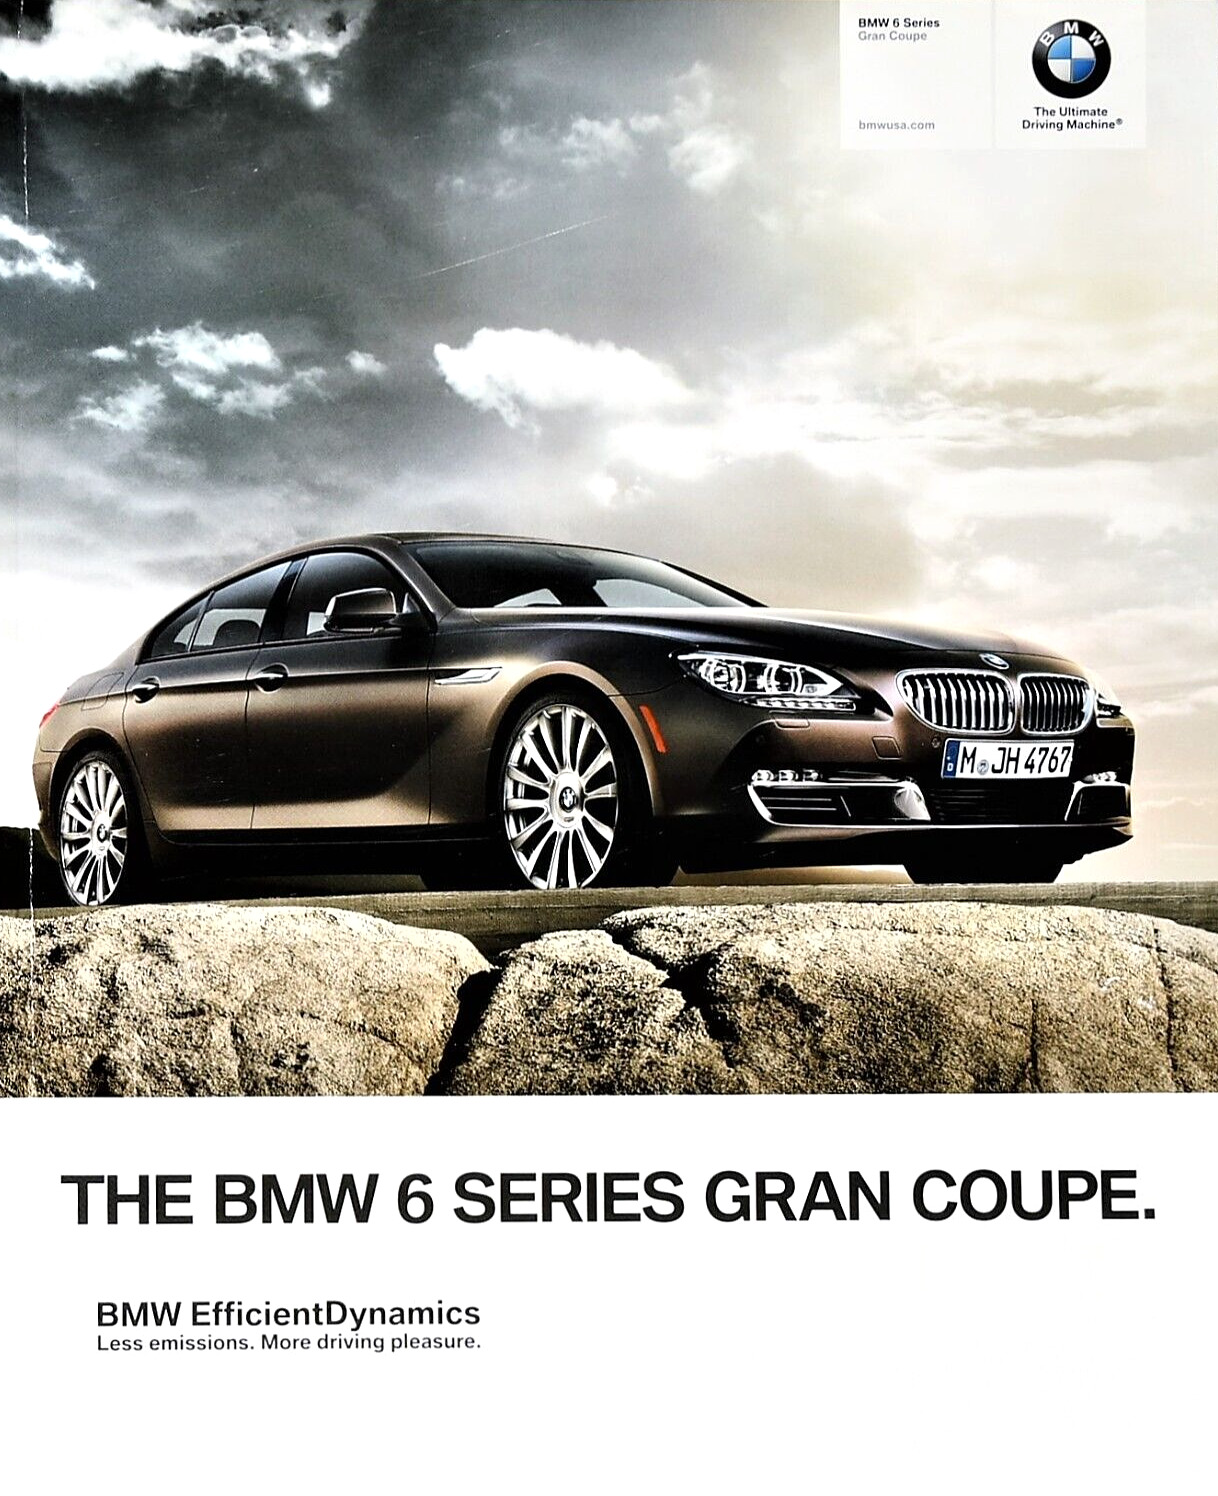 Near Mint 2013 Bmw 6 Series Gran Coupe 70 Page Sales Brochure Catalog